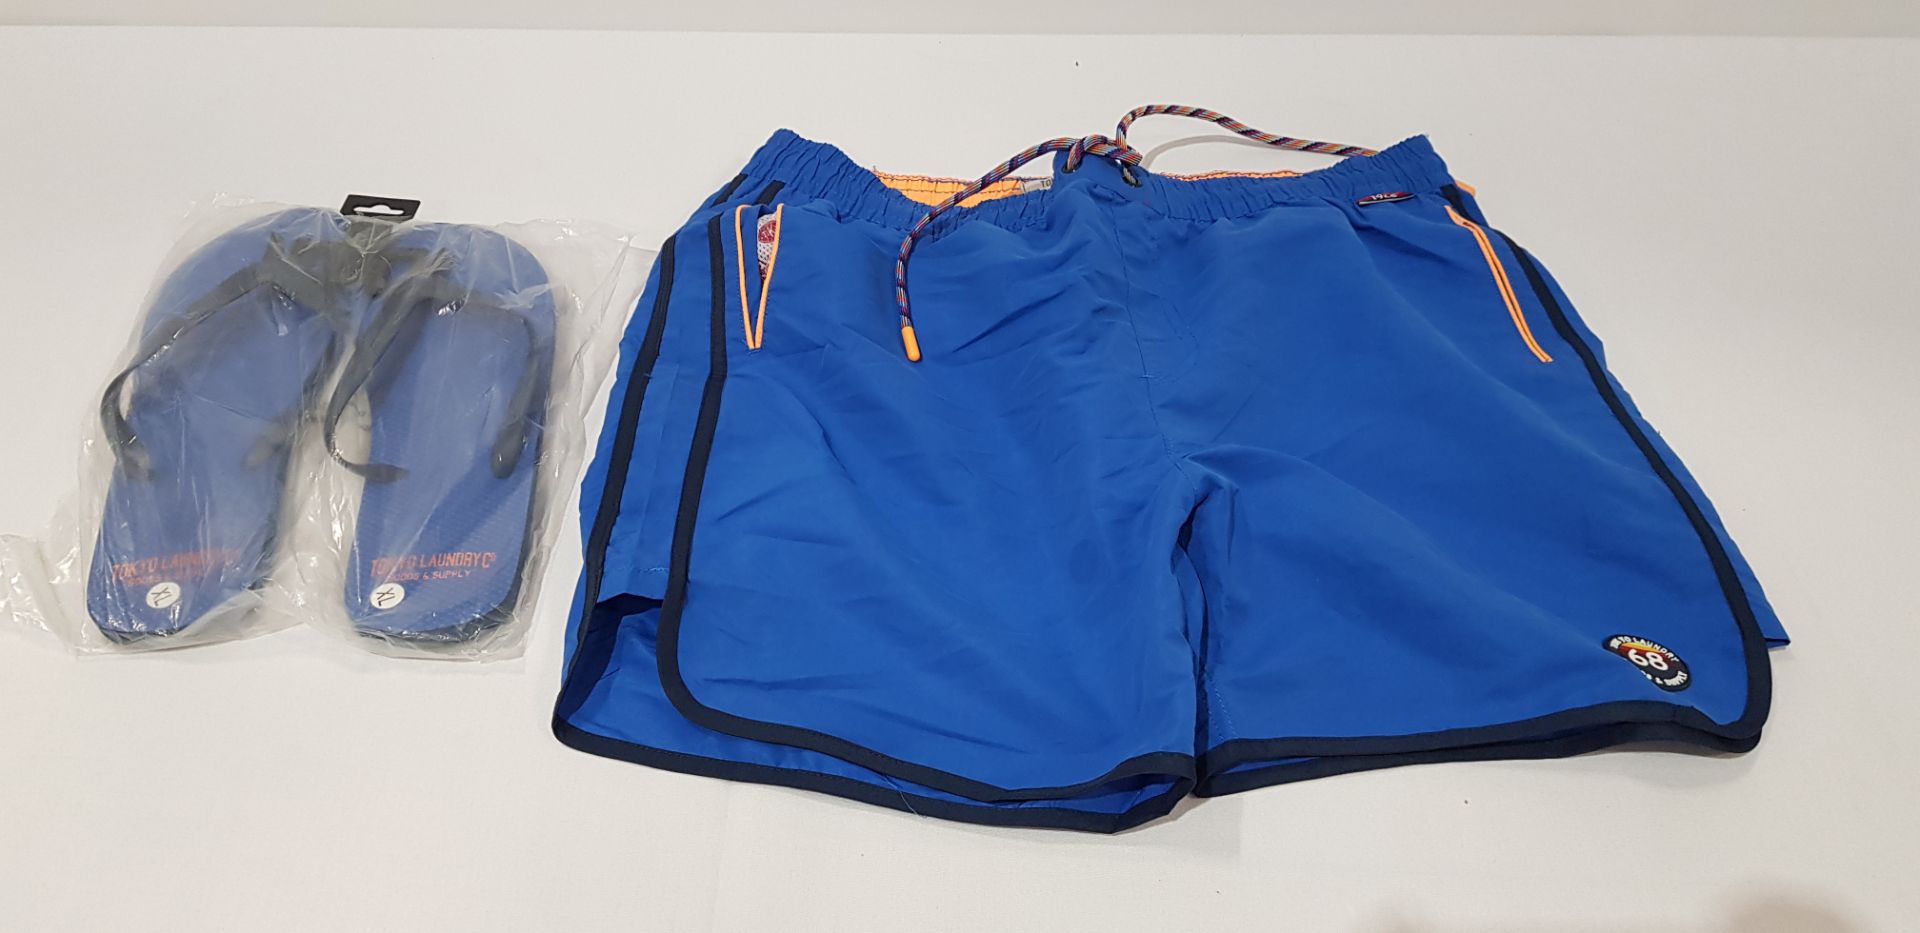 10 X BRAND NEW TOKYO LAUNDRY SHORTS AND FLIP FLOP SETS IN BLUE AND ORANGE SIZES INCLUDE 3 SMALL, 7